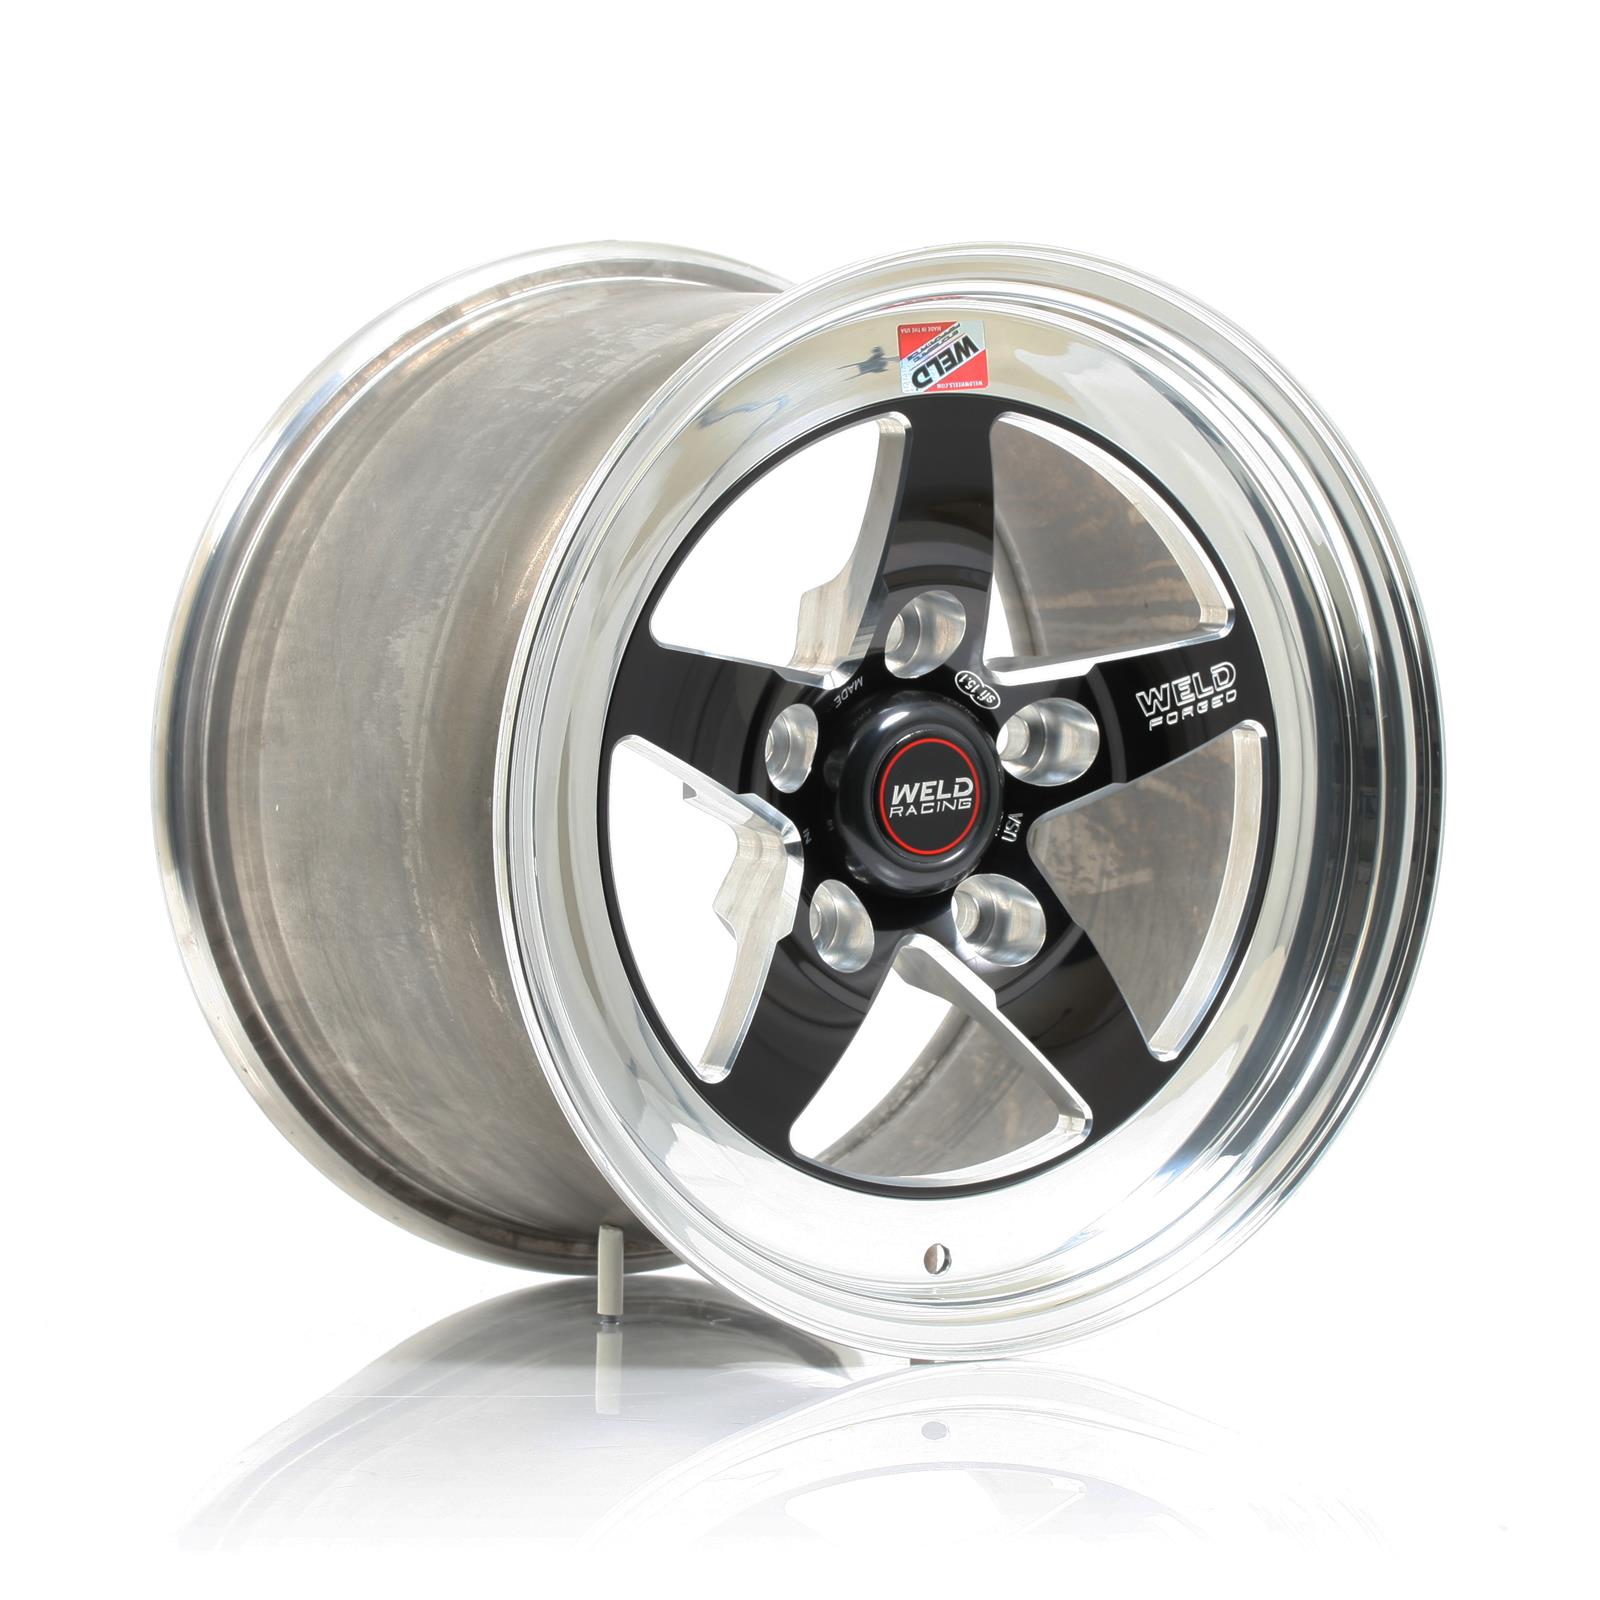 Weld Racing RT-S S71 Forged Aluminum Black Anodized Wheels - 15x10" w/7.5" Back Spacing